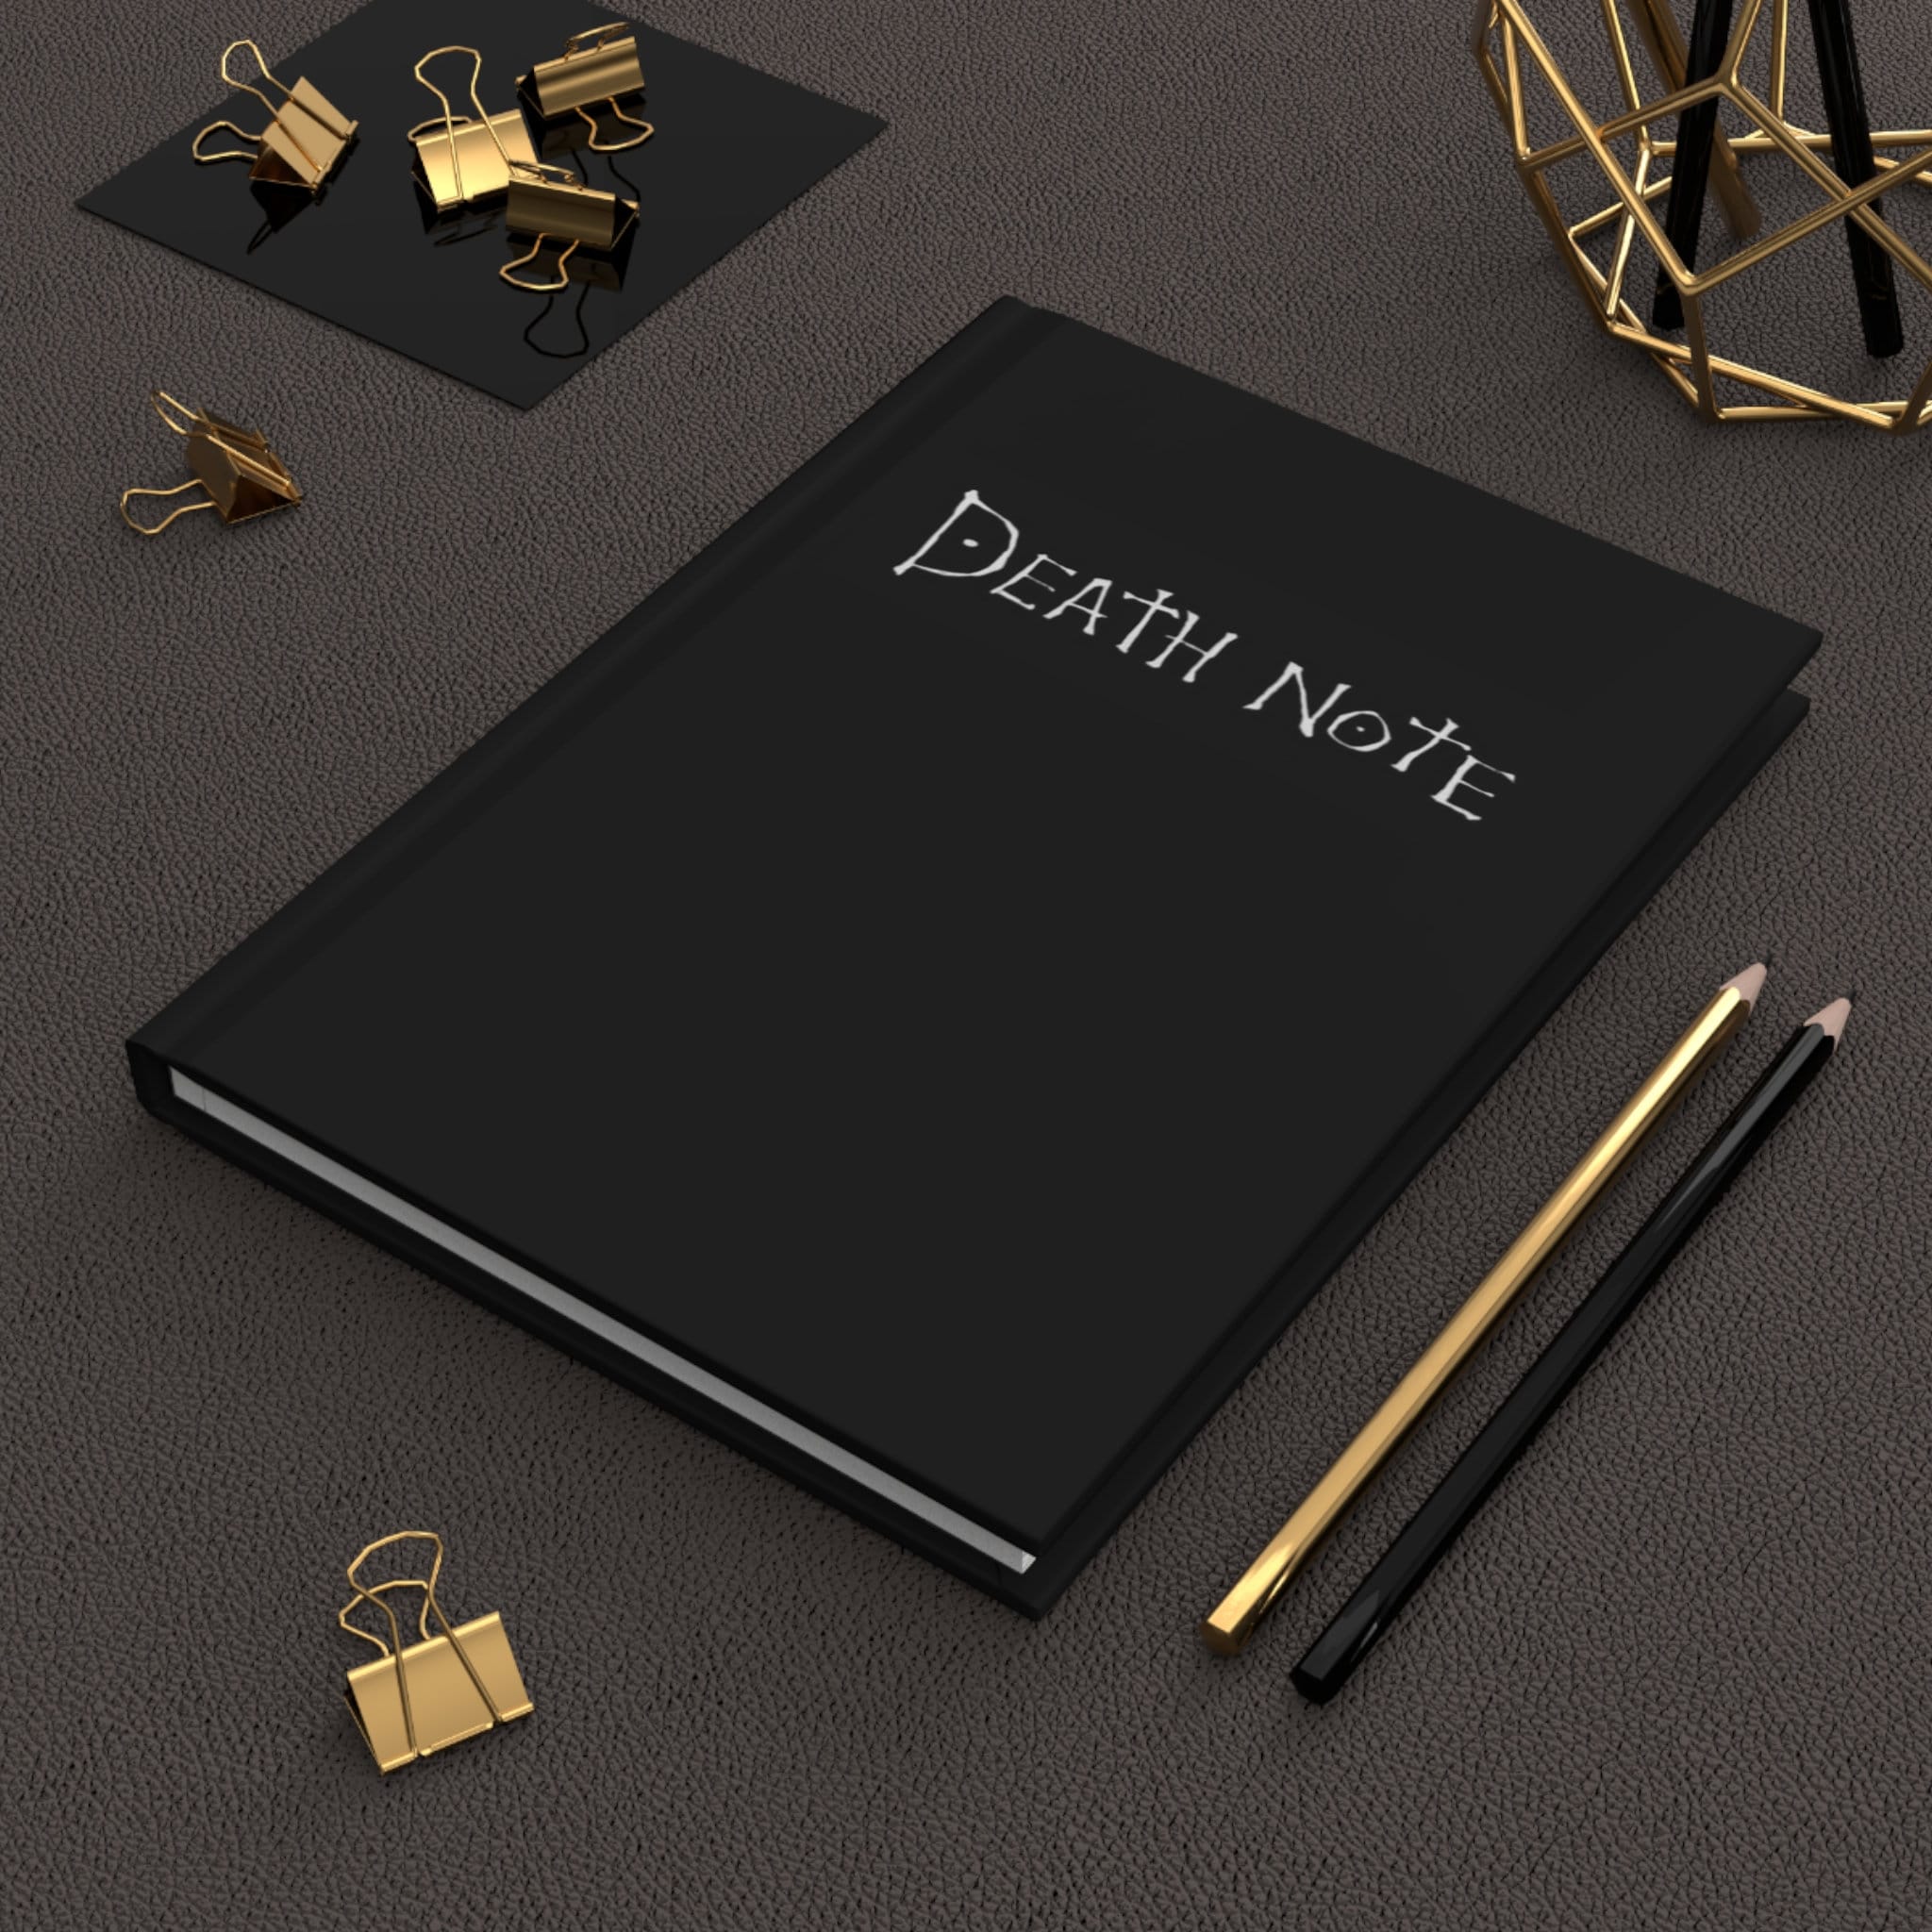 Death Note Notebook & Feather Pen Book Japan Anime Writing Journal New